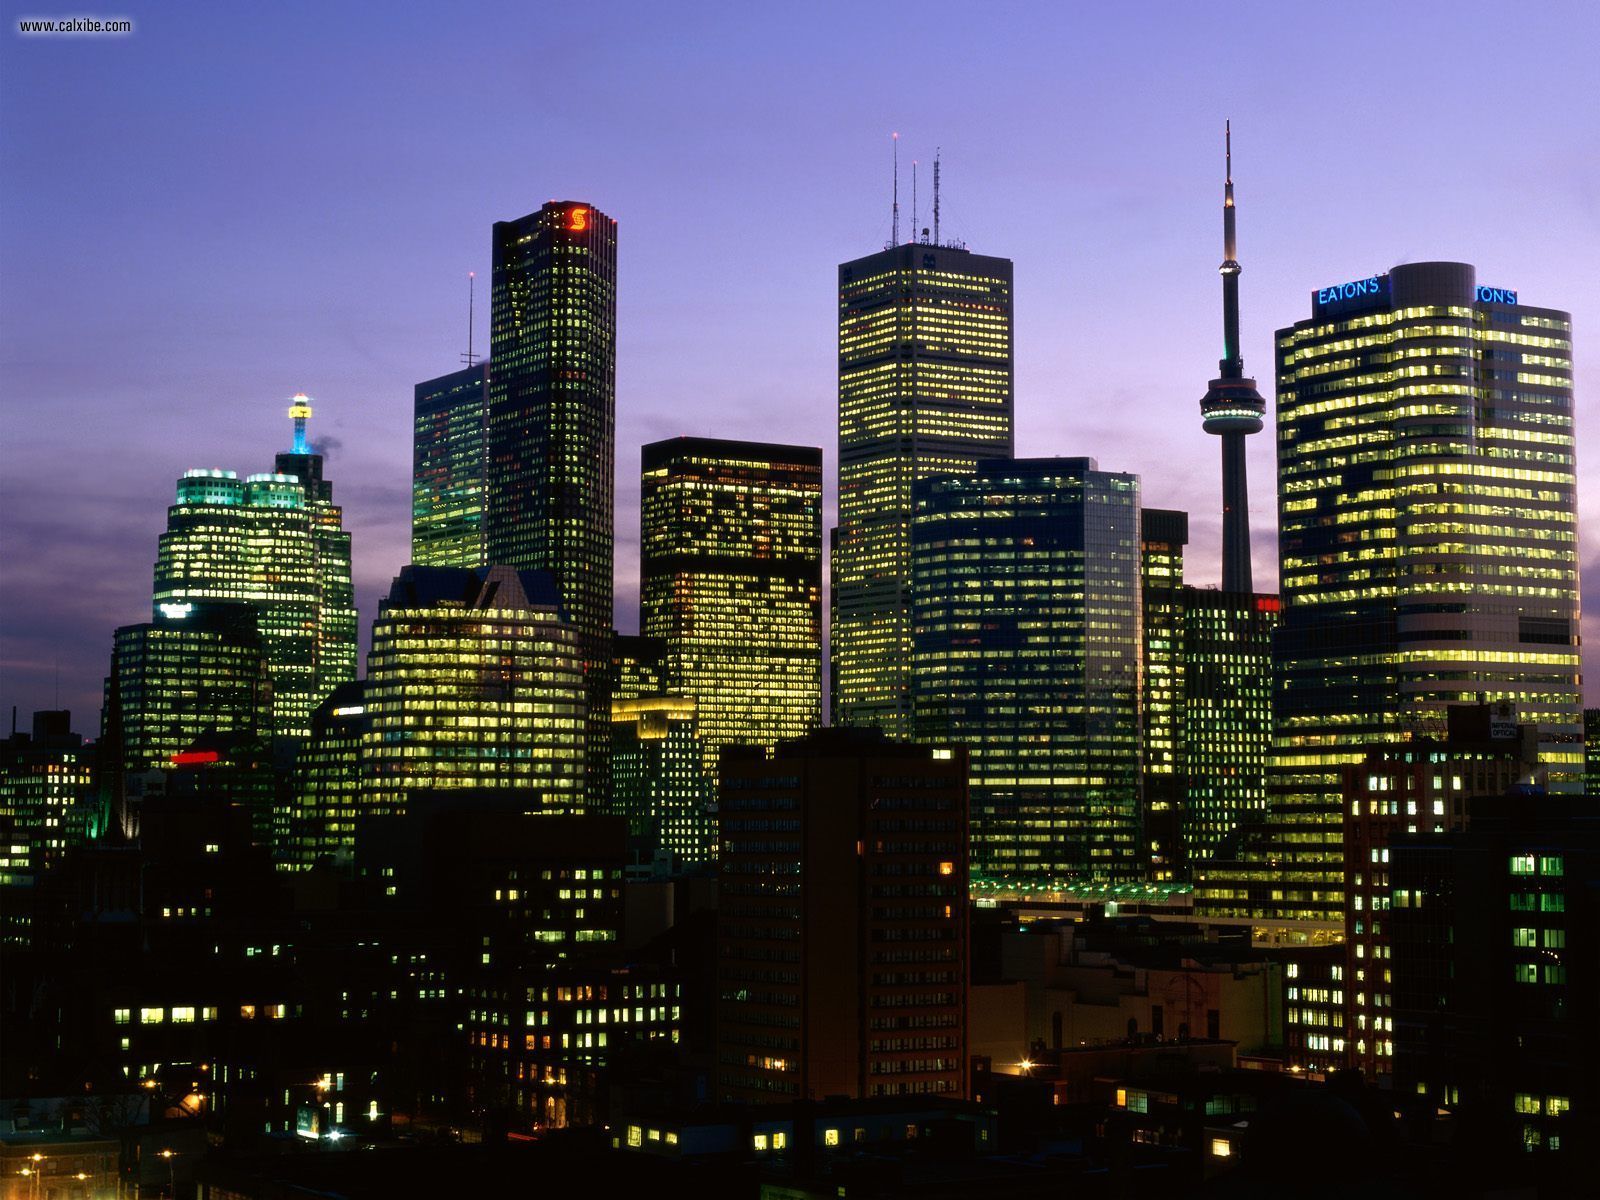 Buildings City Night Falls Over Toronto Ontario picture nr 20600